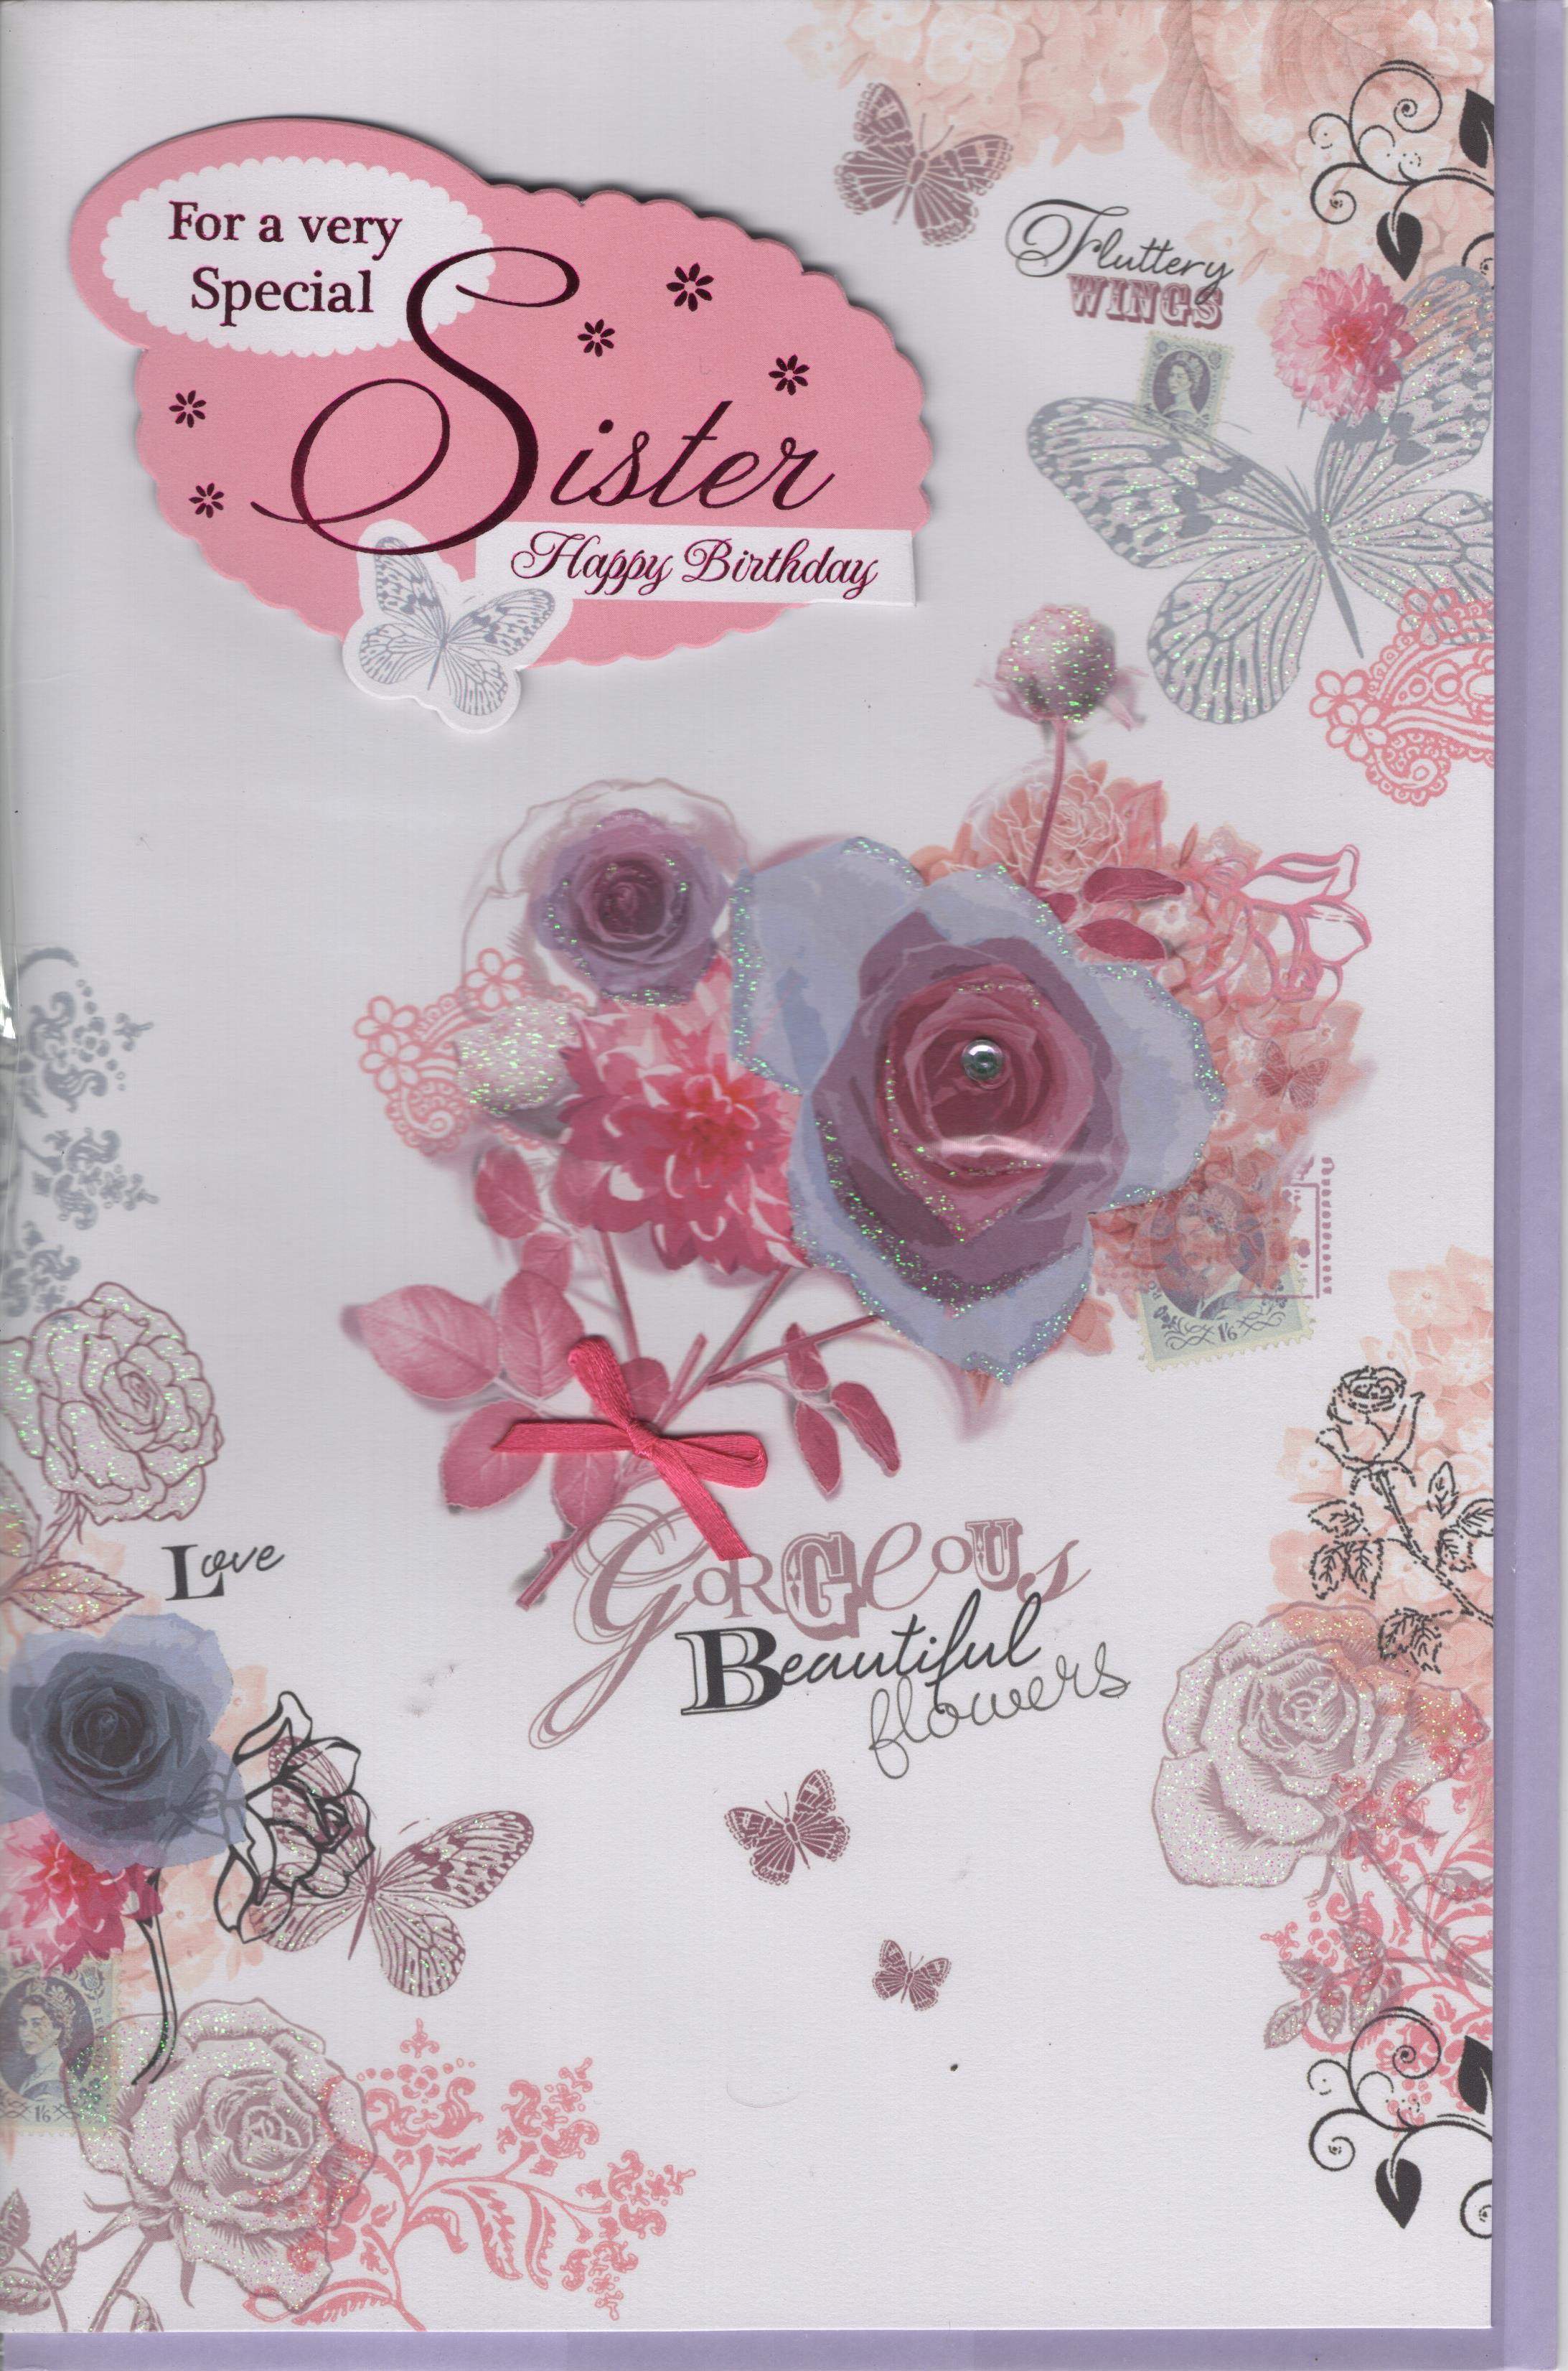 For a Very Special Sister Happy Birthday Greeting Card